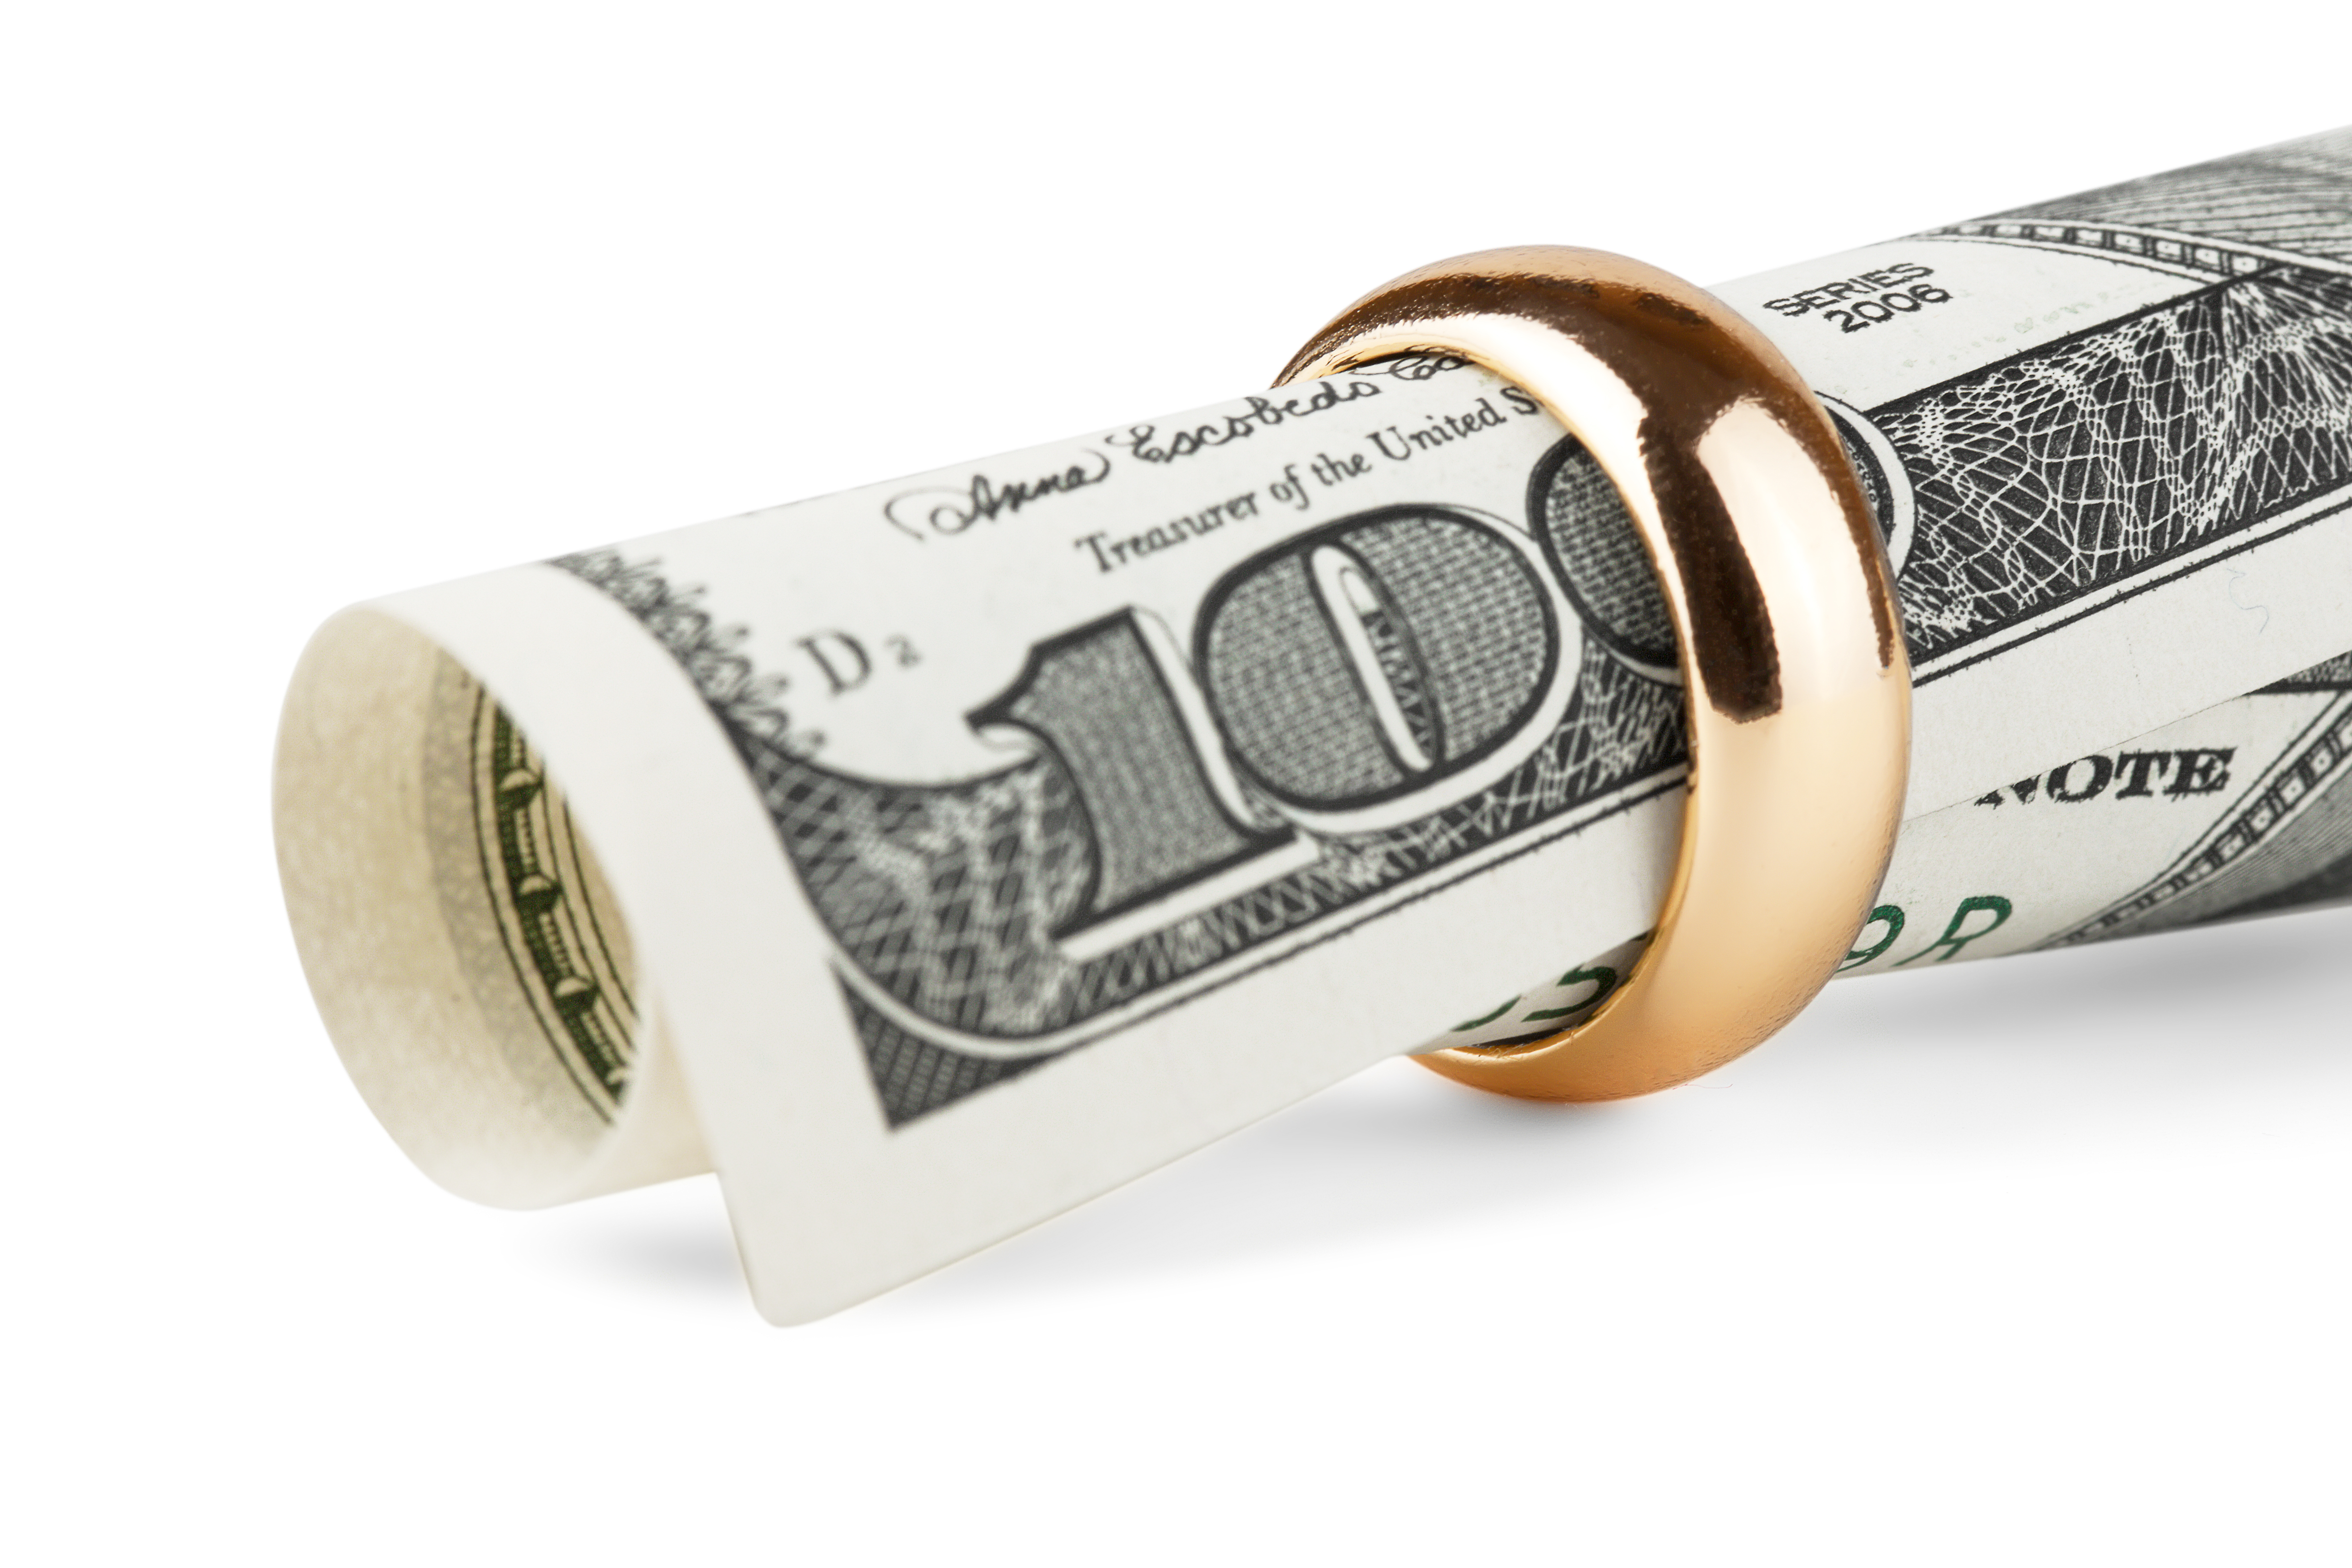 alimony tax law changes rockford divorce lawyer